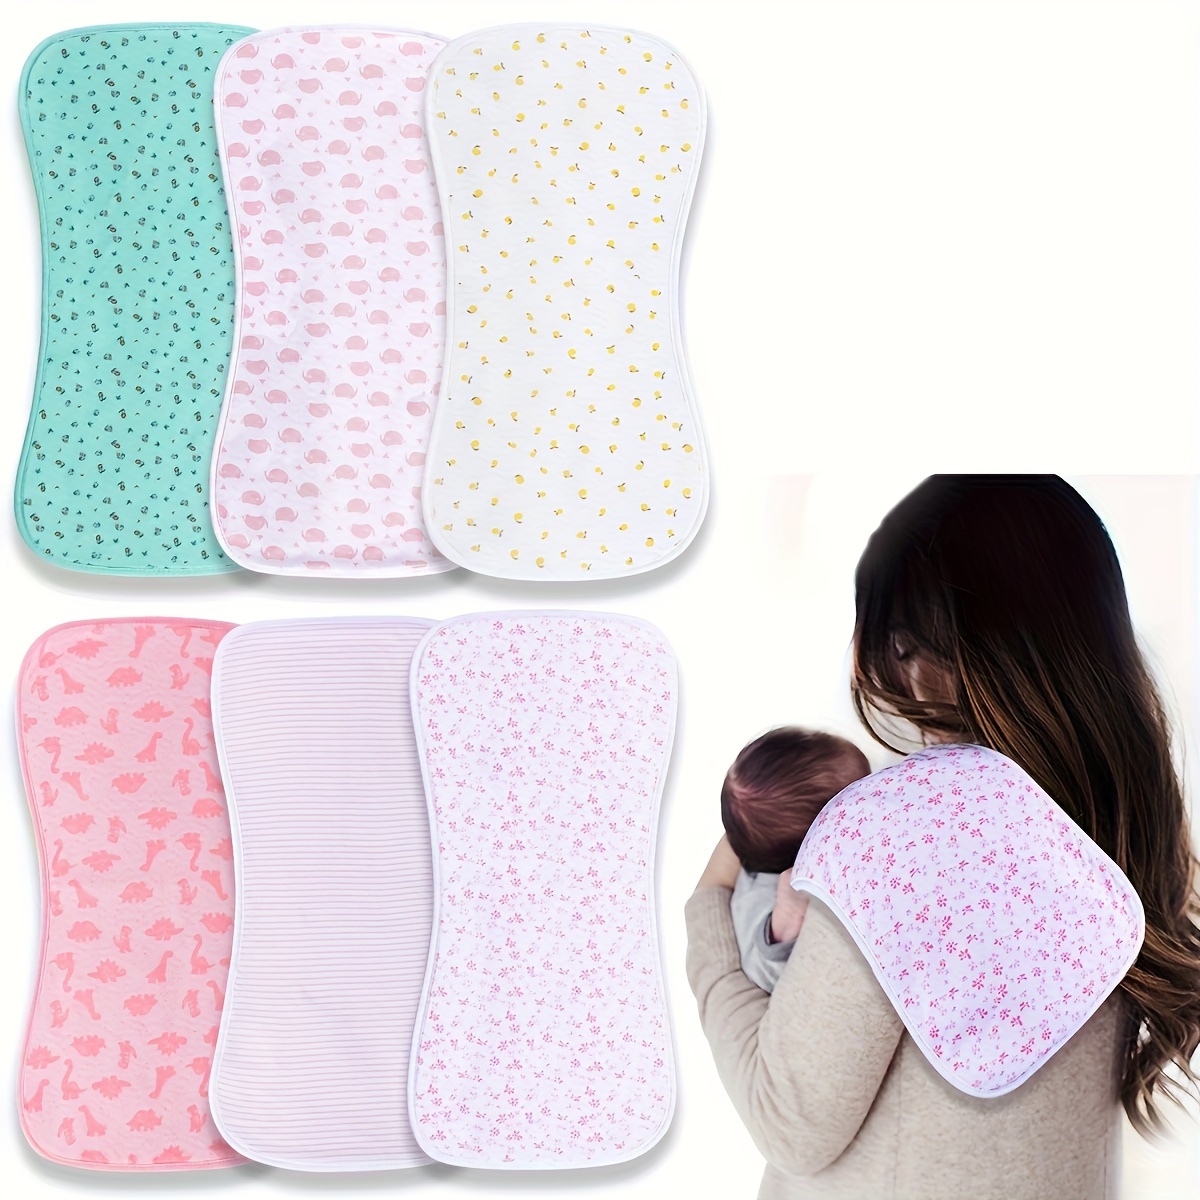 

Burp Cloths For Baby Girls Large Burp Clothes Extra Absorbent Soft Burping Rags Spit Up Cloth Sets For Newborns 8 Pack